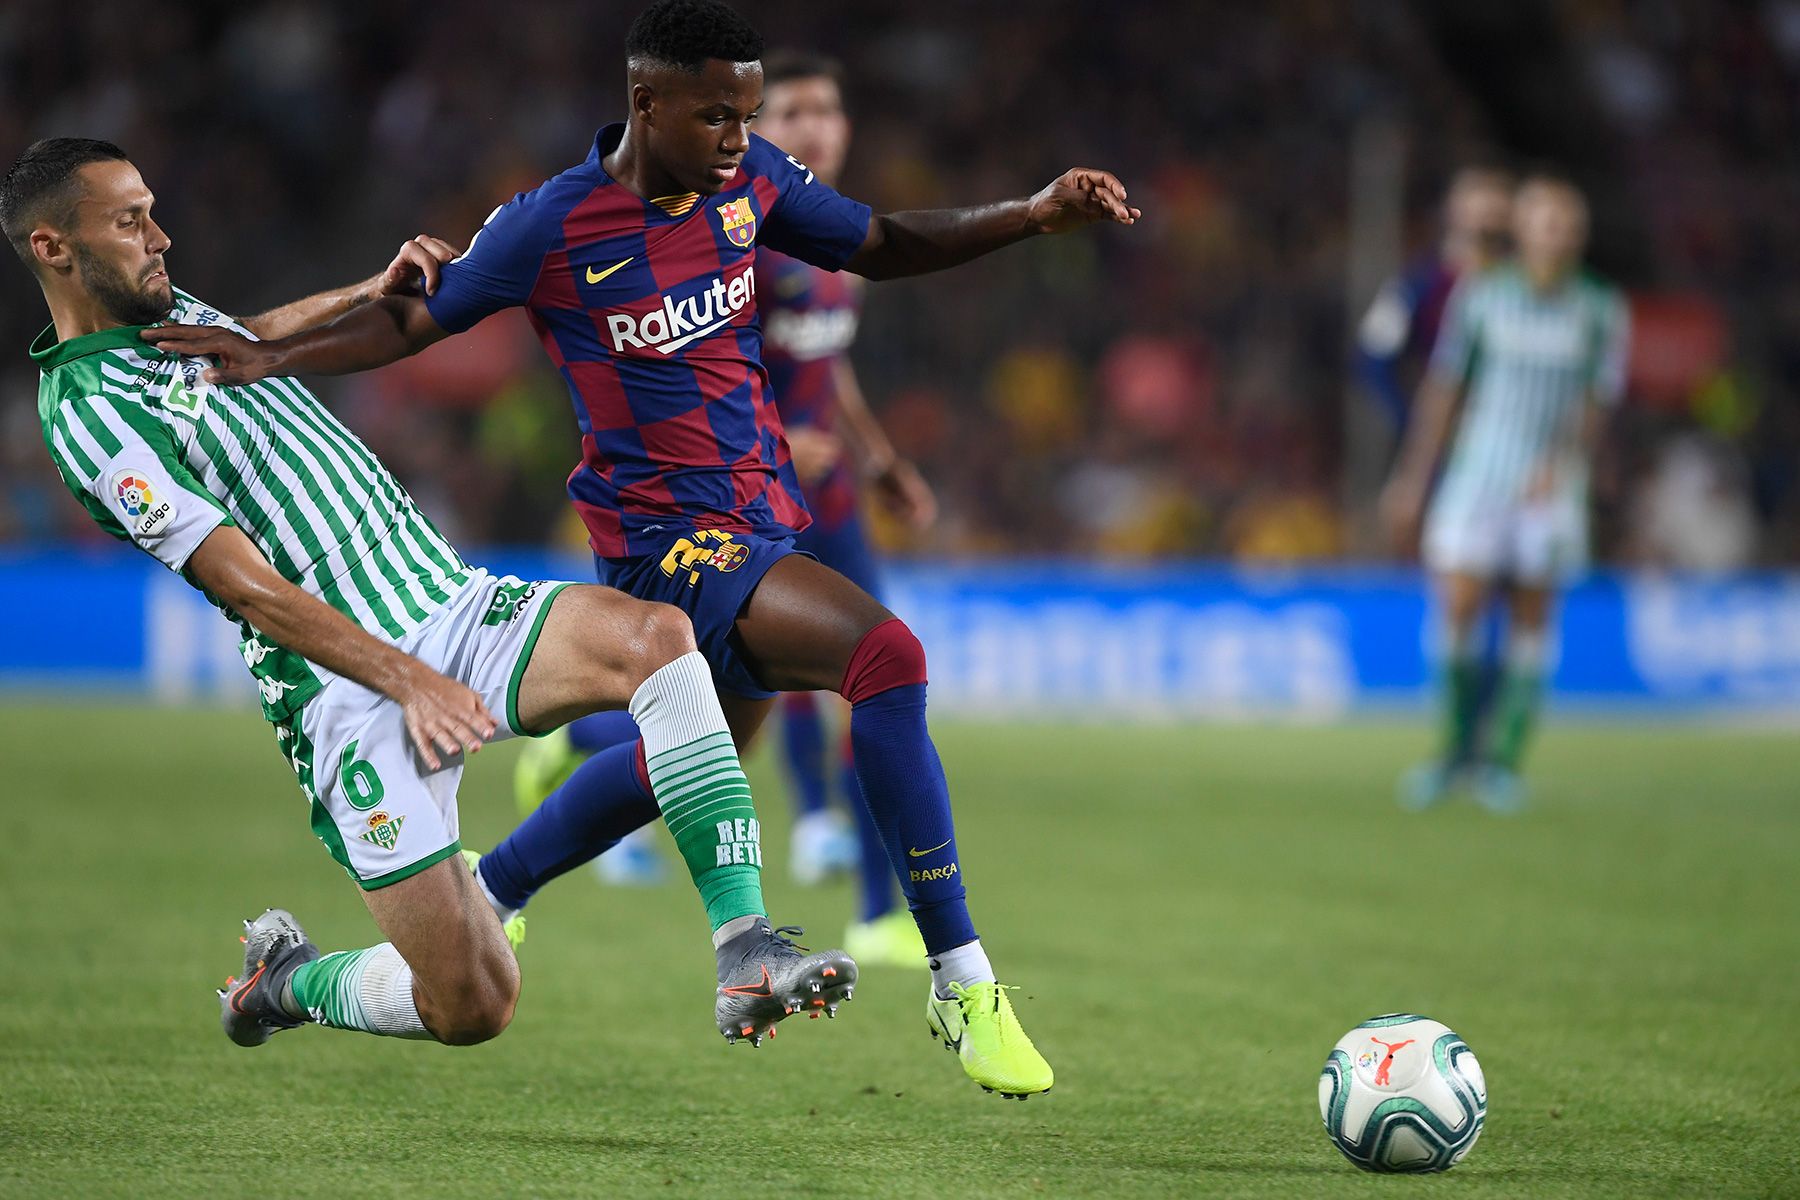 Ansu Fati In his debut against the Betis in the Camp Nou